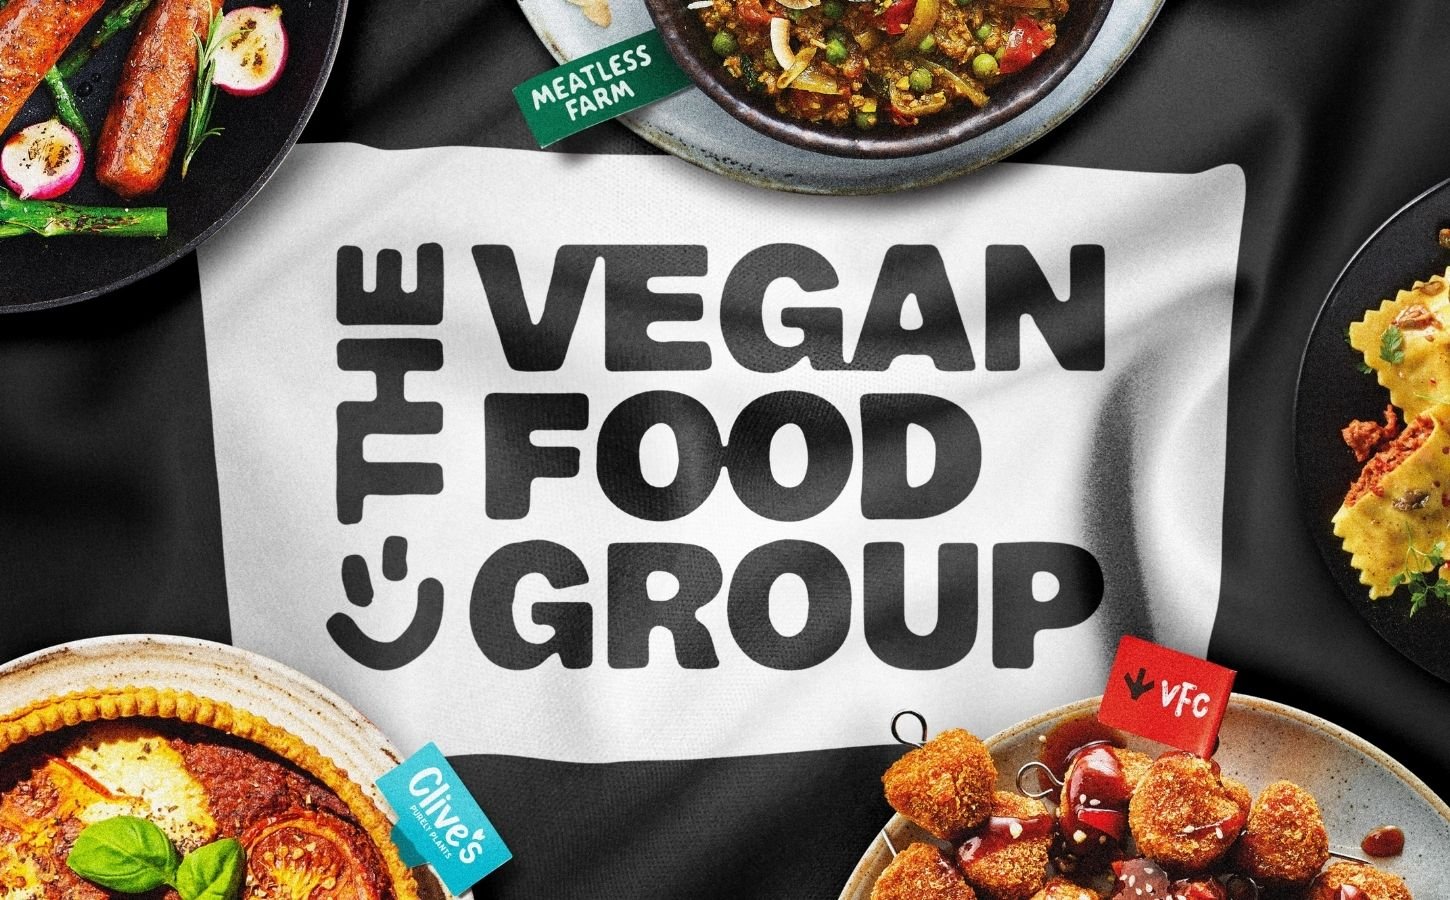 The Vegan Food Group logo, which has recently been rebranded from VFC Foods